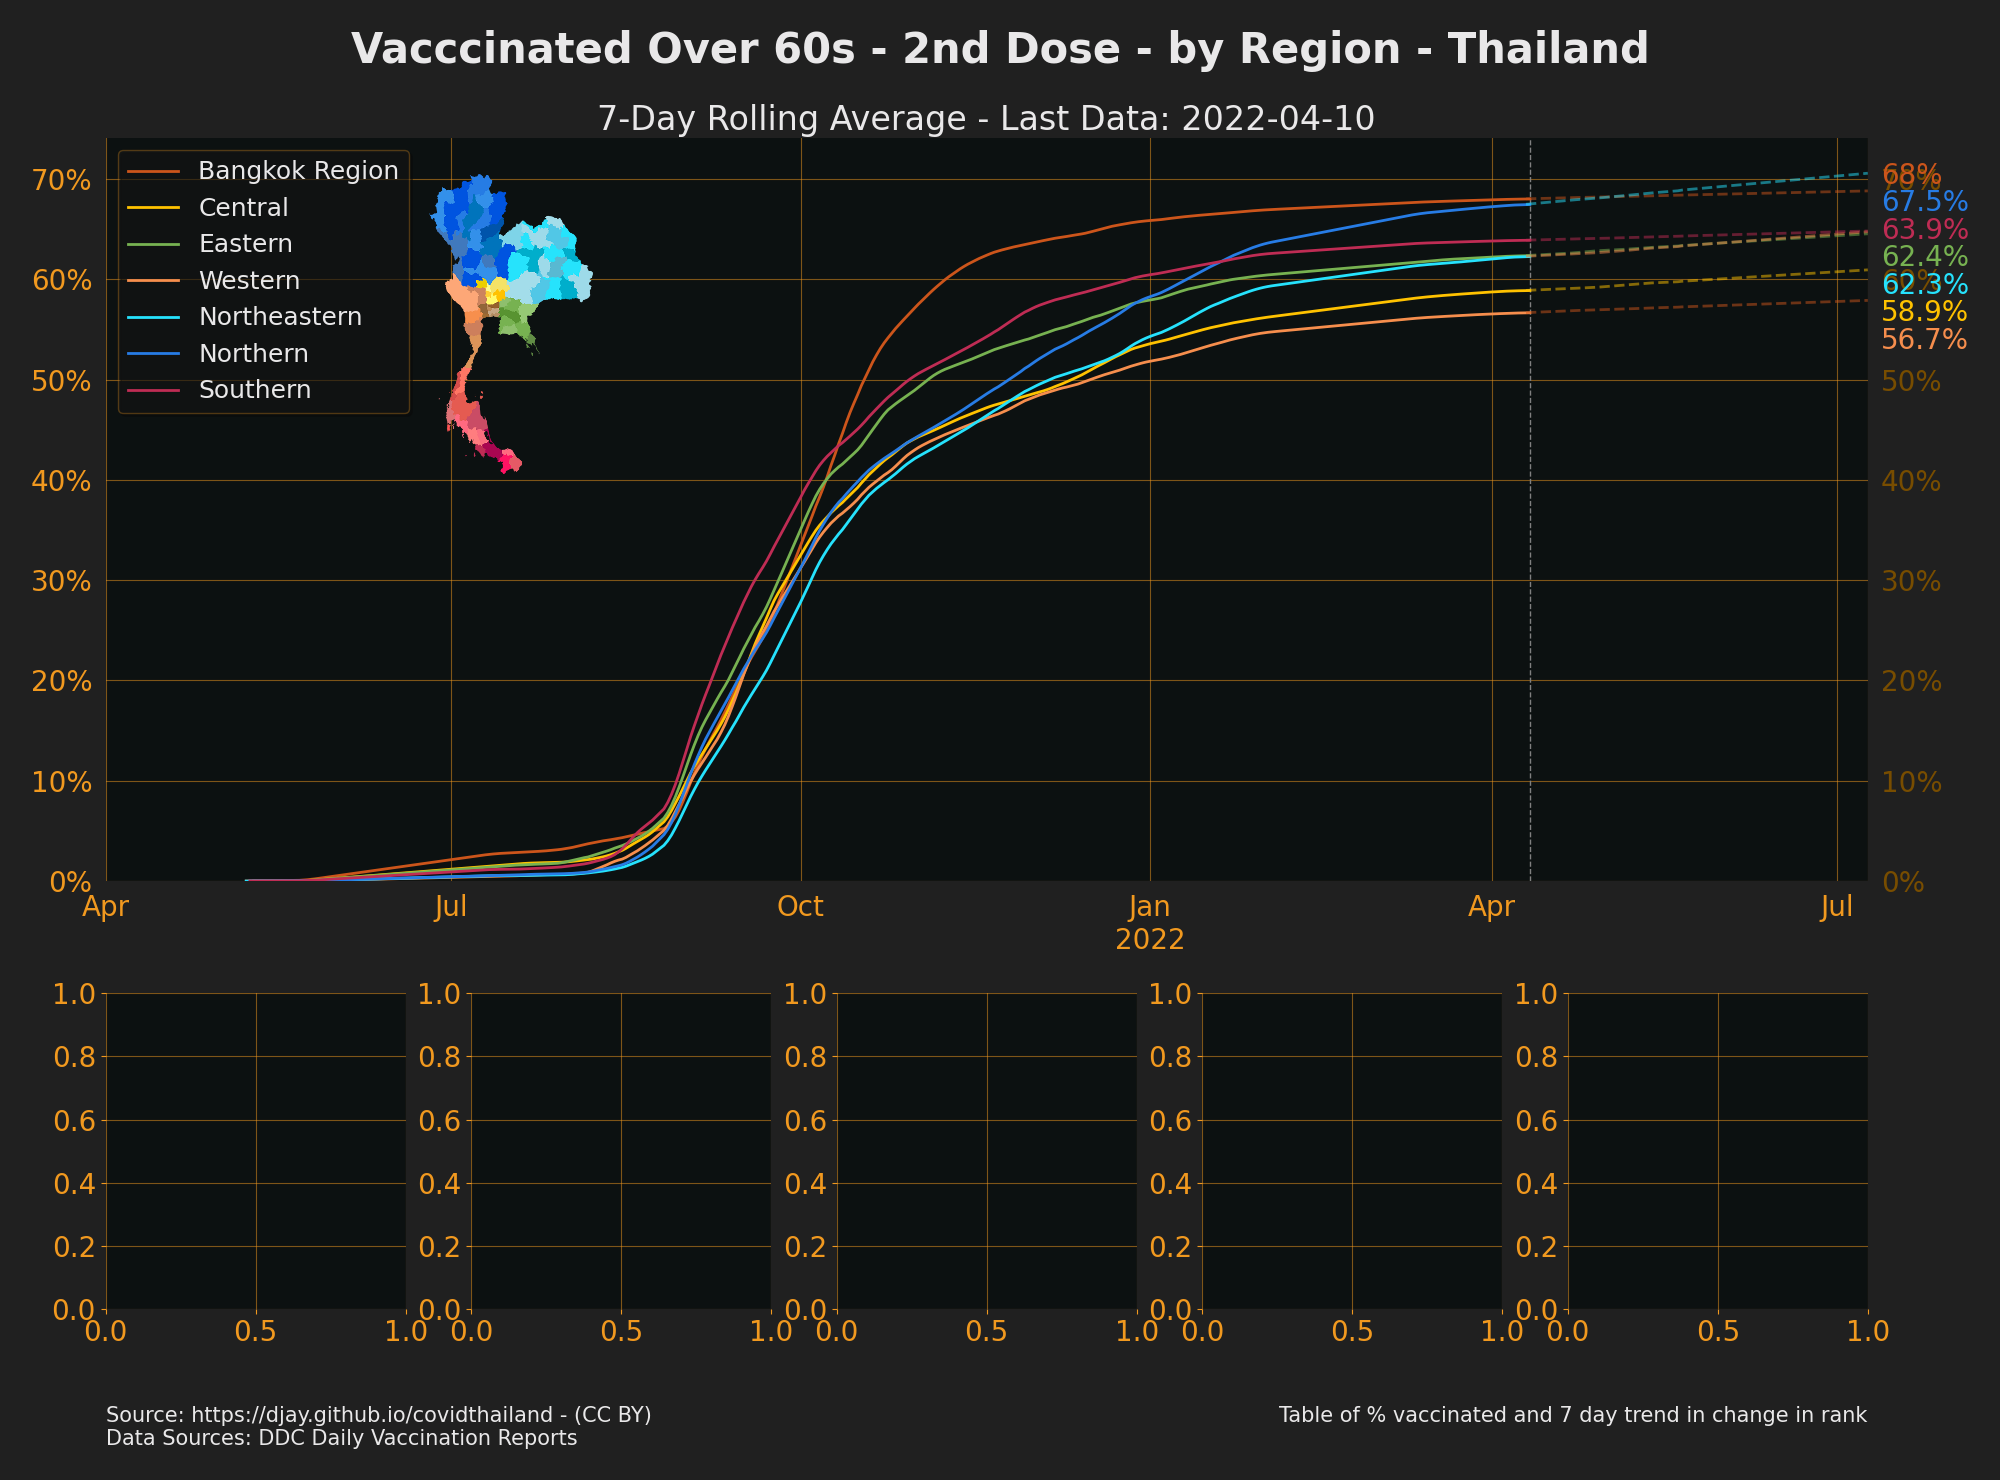 Vacccinated Over 60s - 2nd Dose - by Region